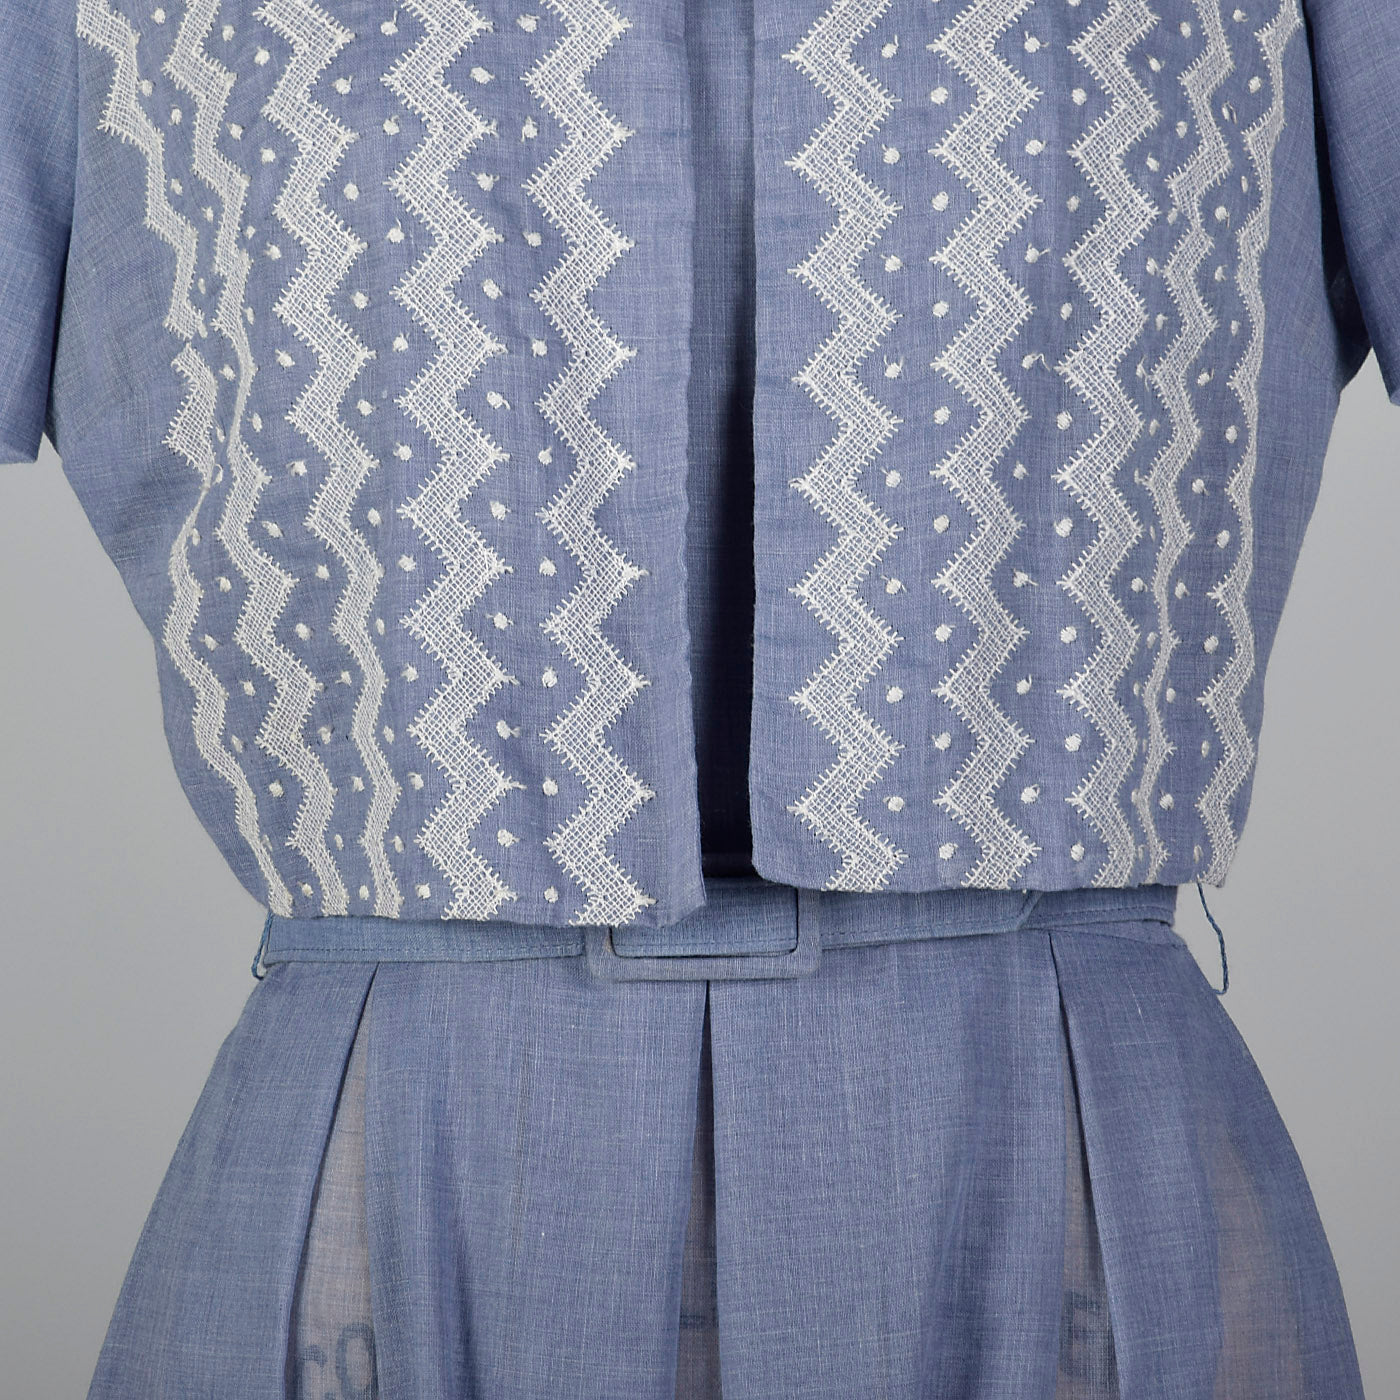 1960s Blue Dress with Embroidered Jacket